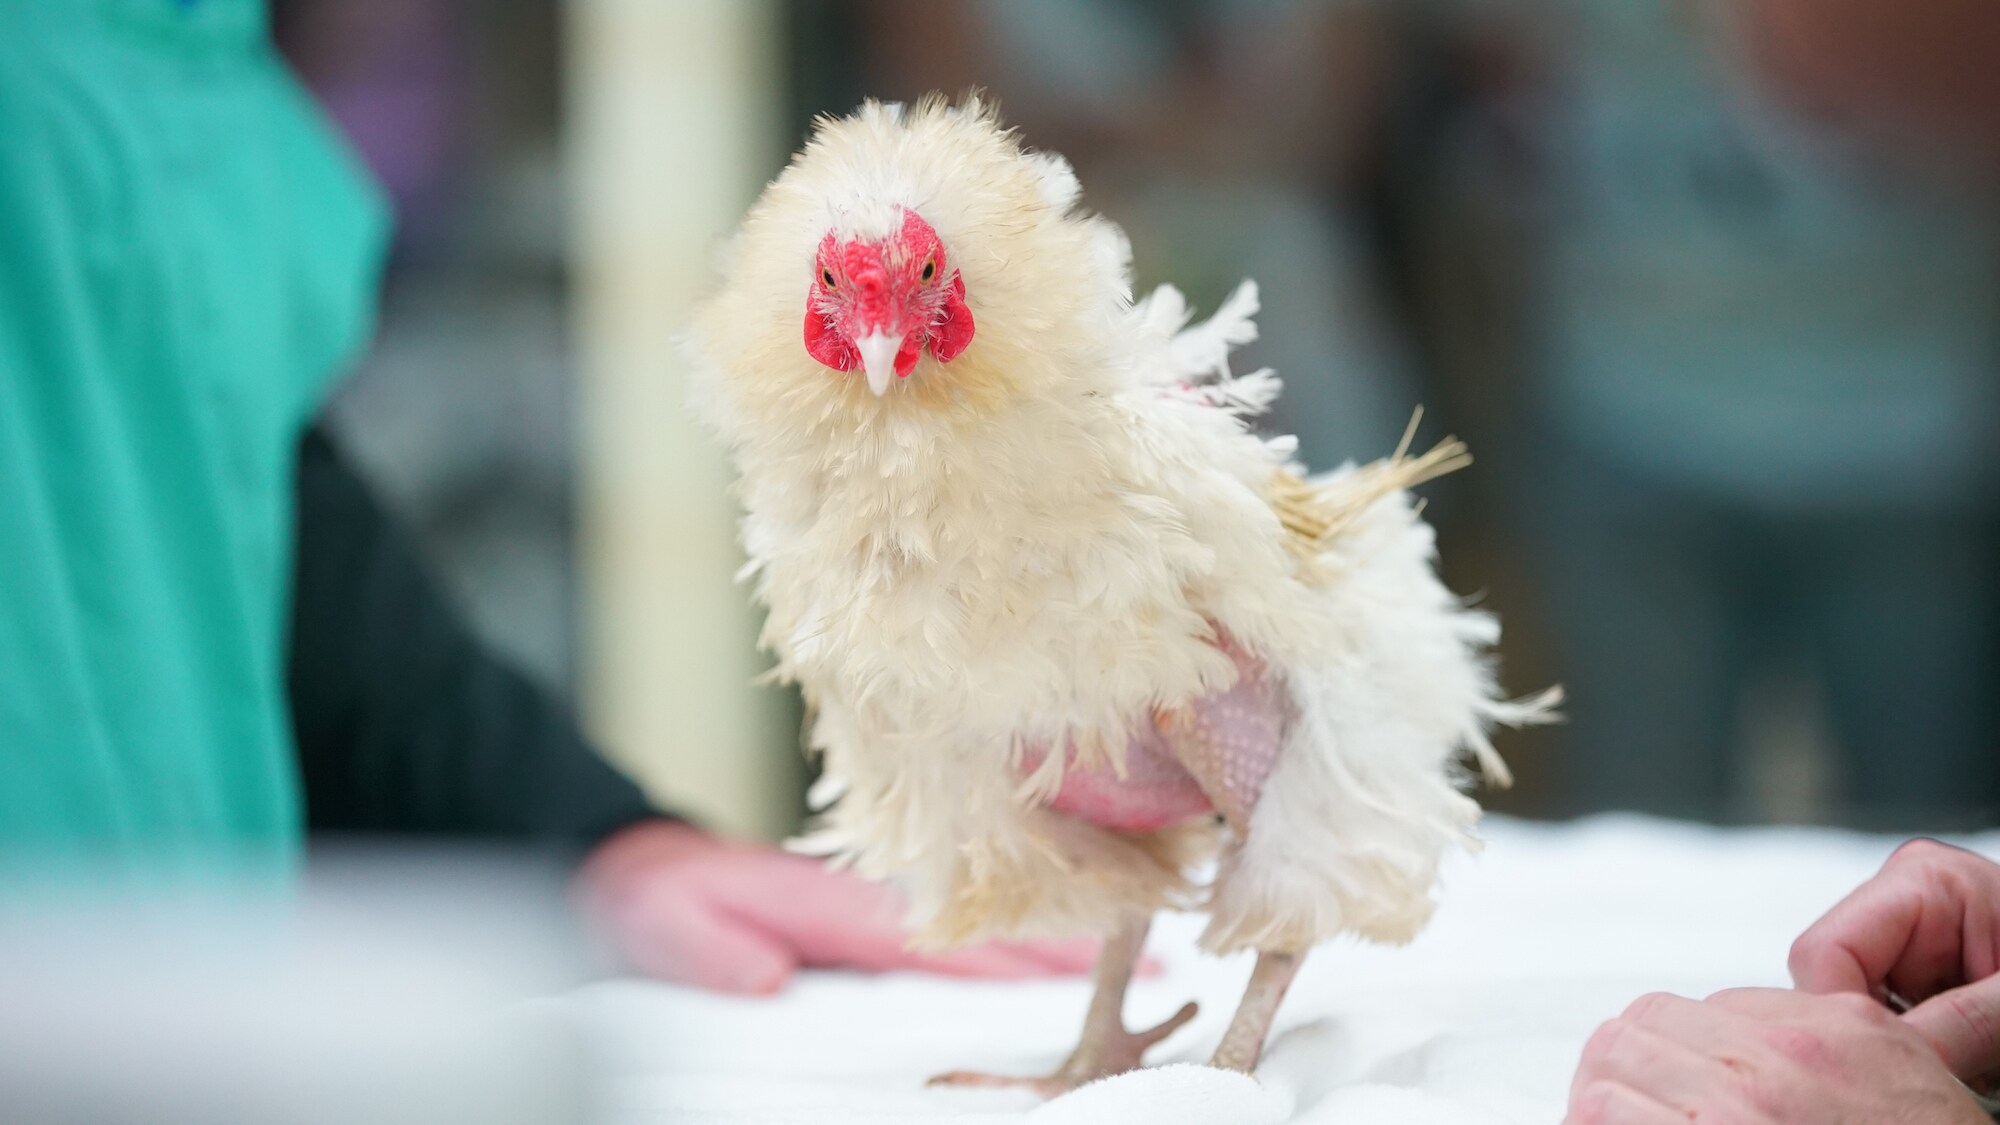 Popcorn, the Frizzle Chicken, receives a checkup after undergoing reproductive surgery. (Disney)